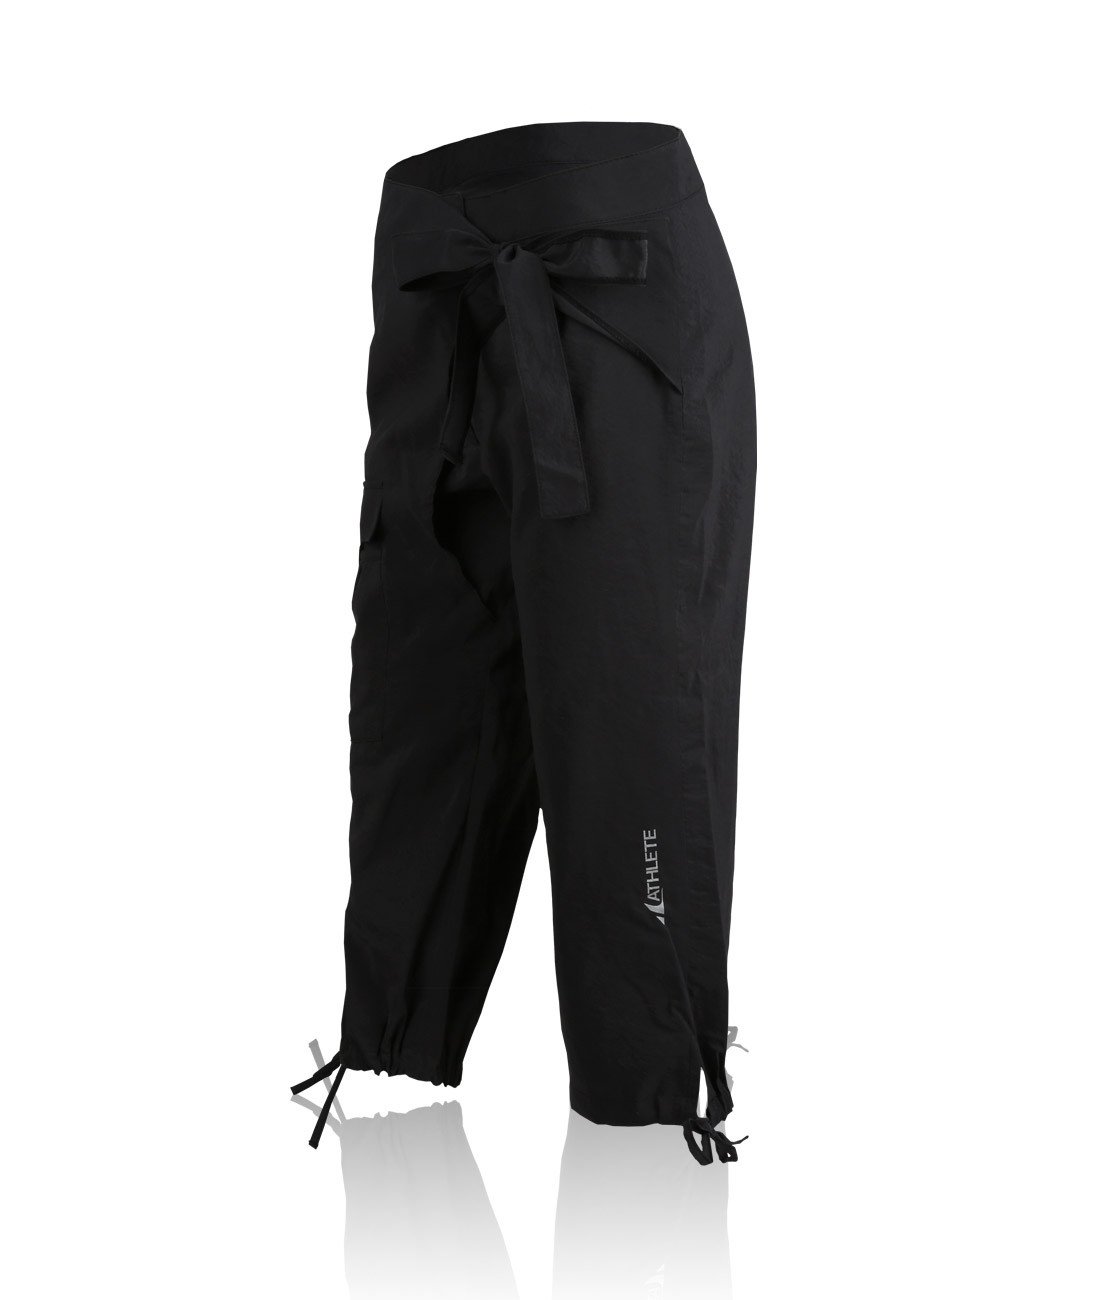 Stay Active in Style with Women's Athletic Pants and Shorts - Got